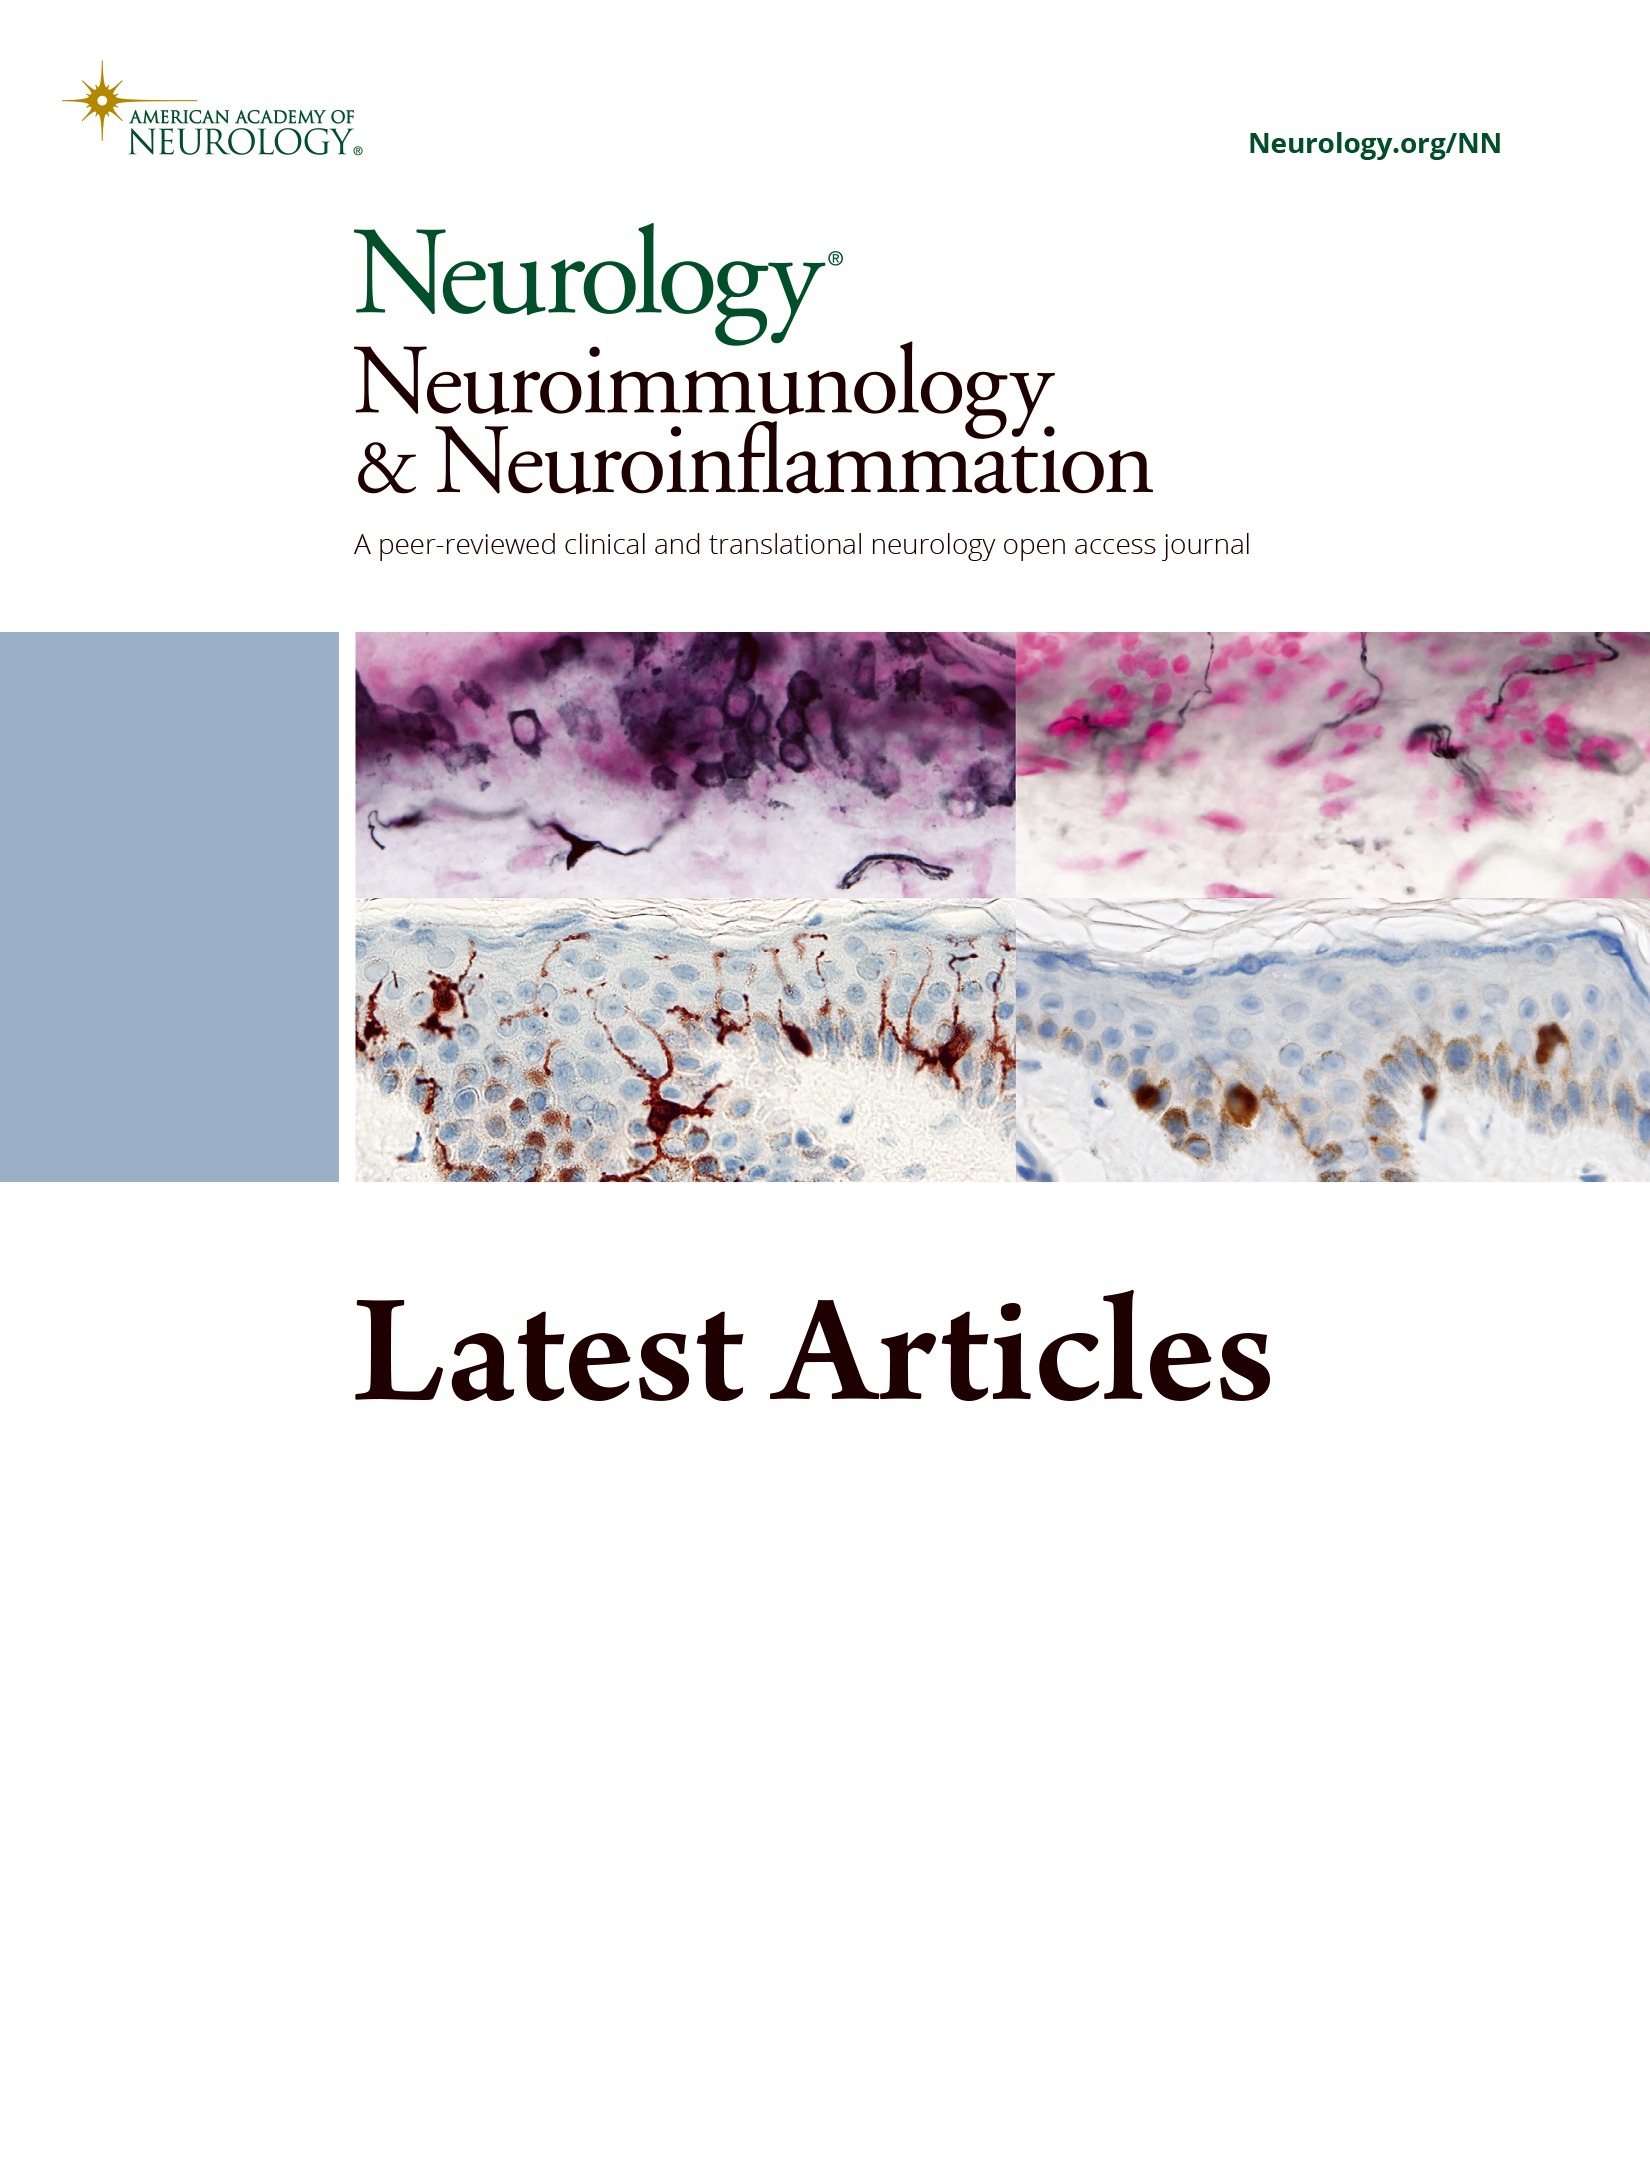 Autocrine TNF-{alpha} Increases Penetration of Myelin-Associated Glycoprotein Antibodies Across the Blood-Nerve Barrier in Anti-MAG Neuropathy